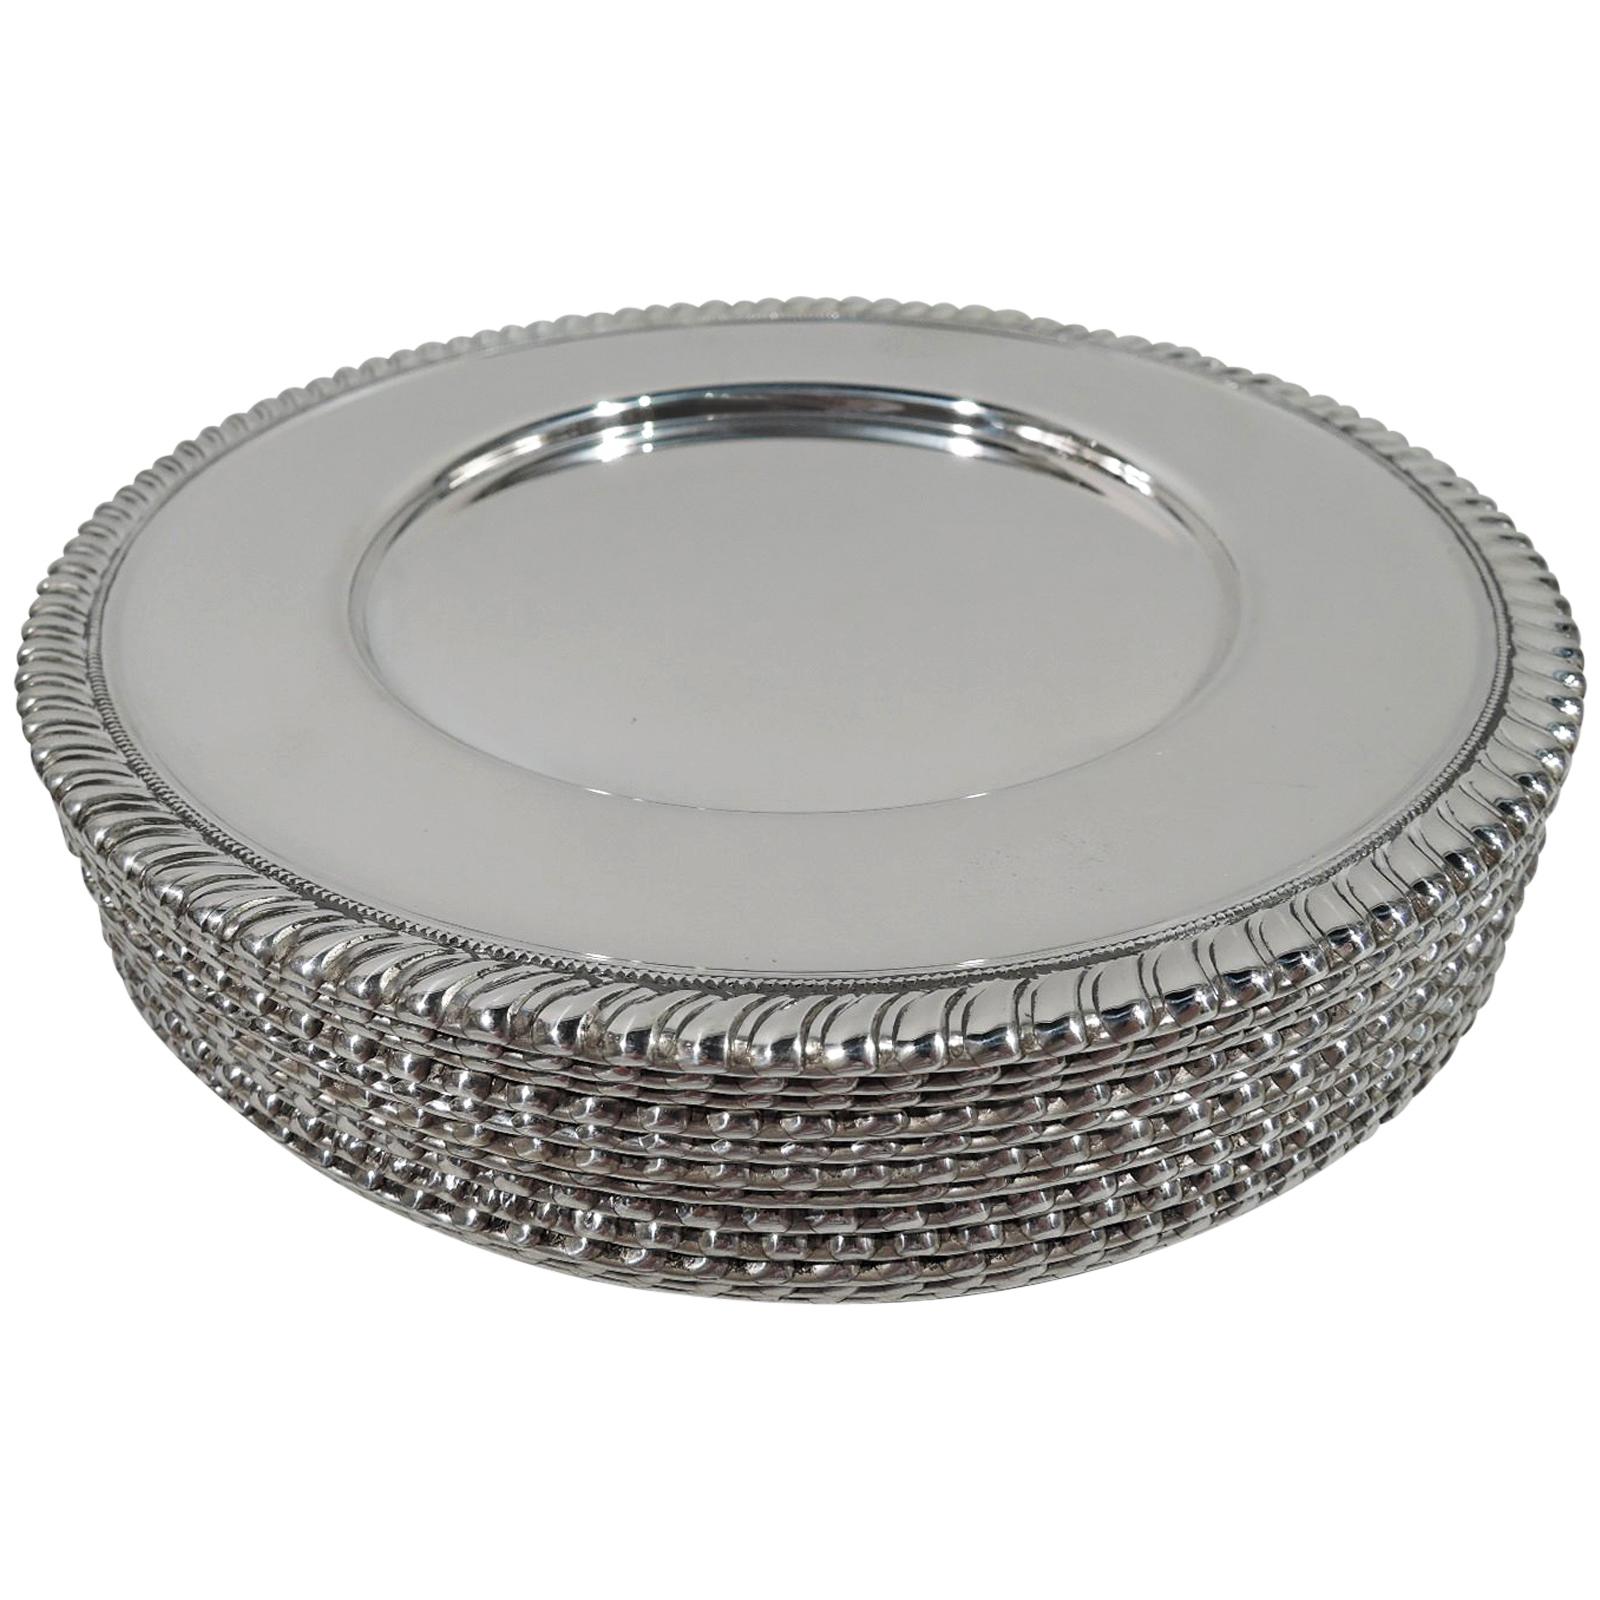 Set of 12 American Art Deco Modern Sterling Silver Bread and Butter Plates